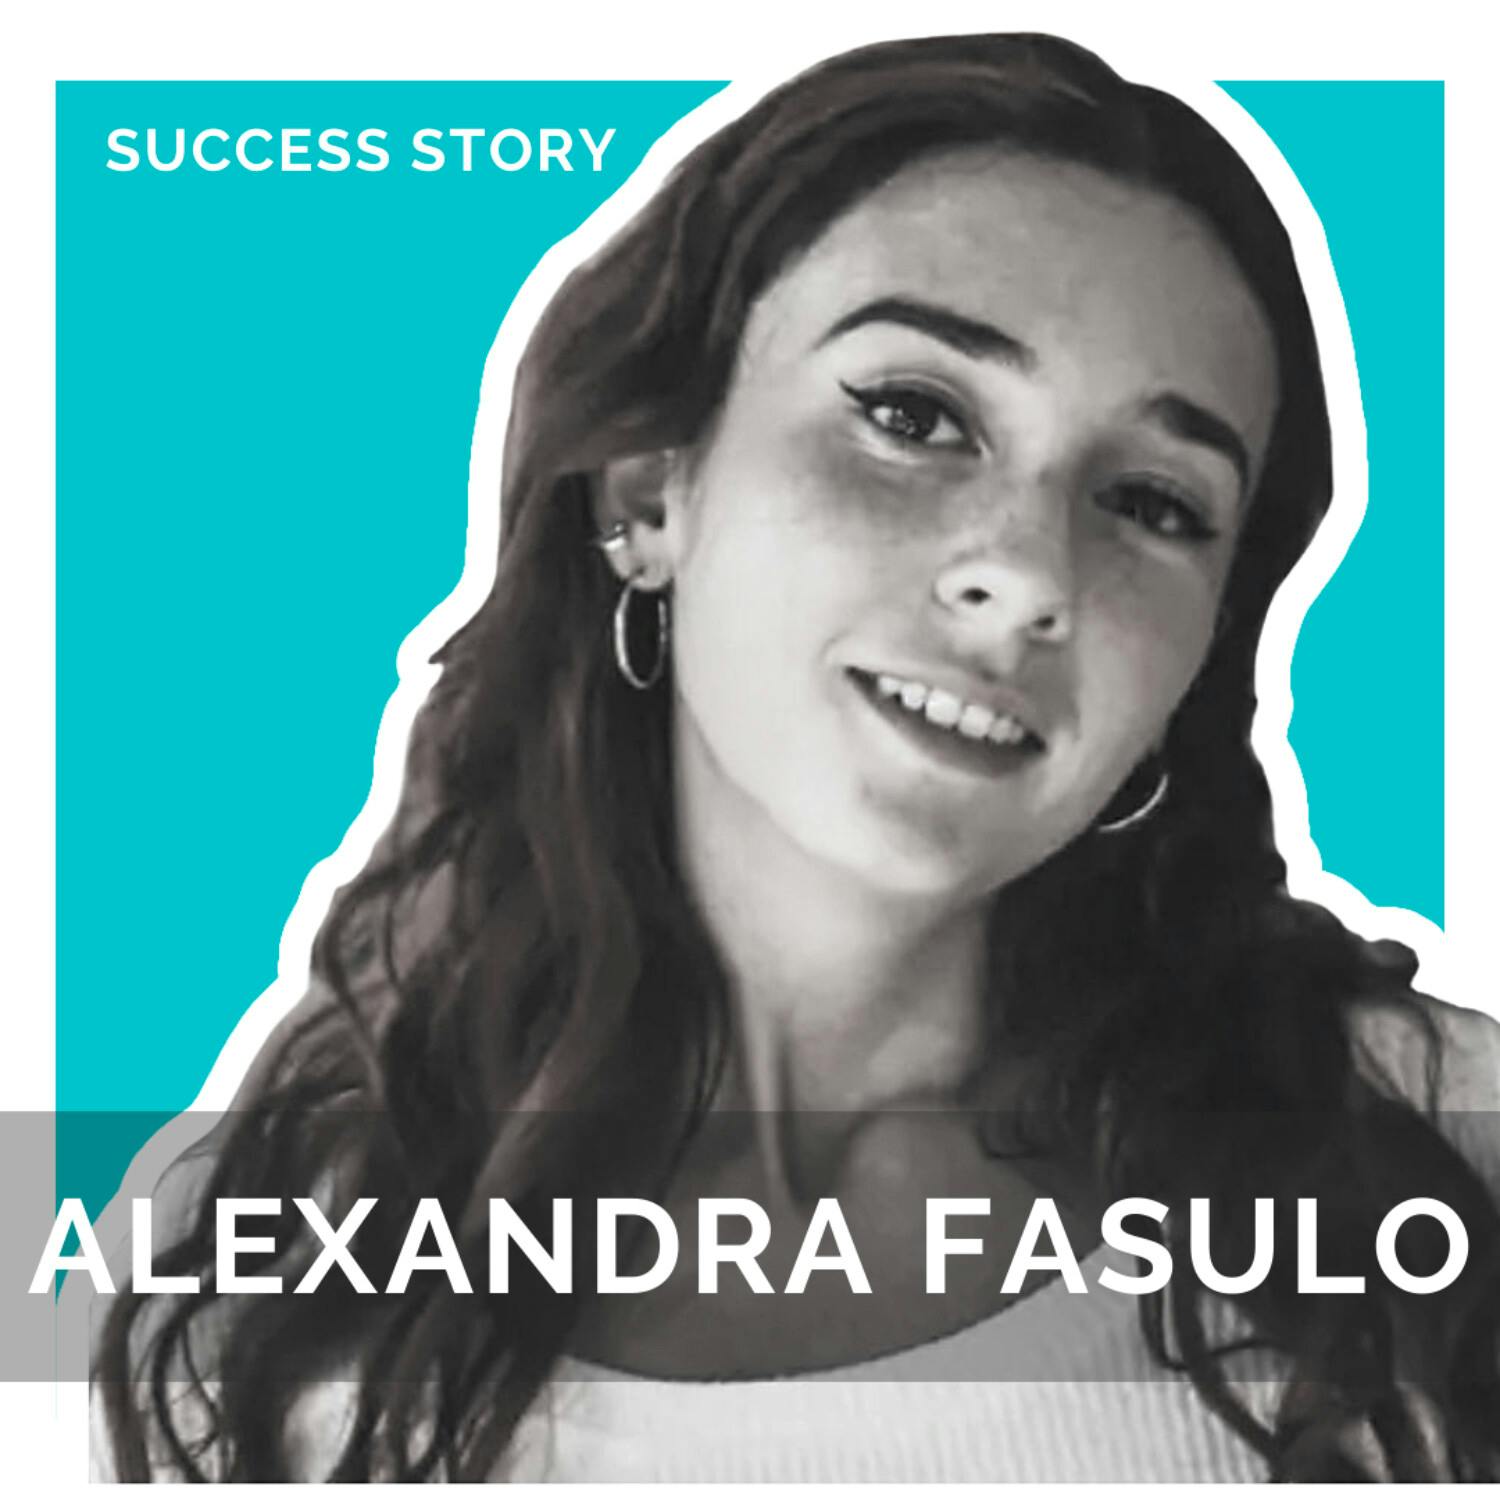 Alexandra Fasulo, Full Time Digital Nomad | How to Make 7 Figures Freelancing on Fiverr